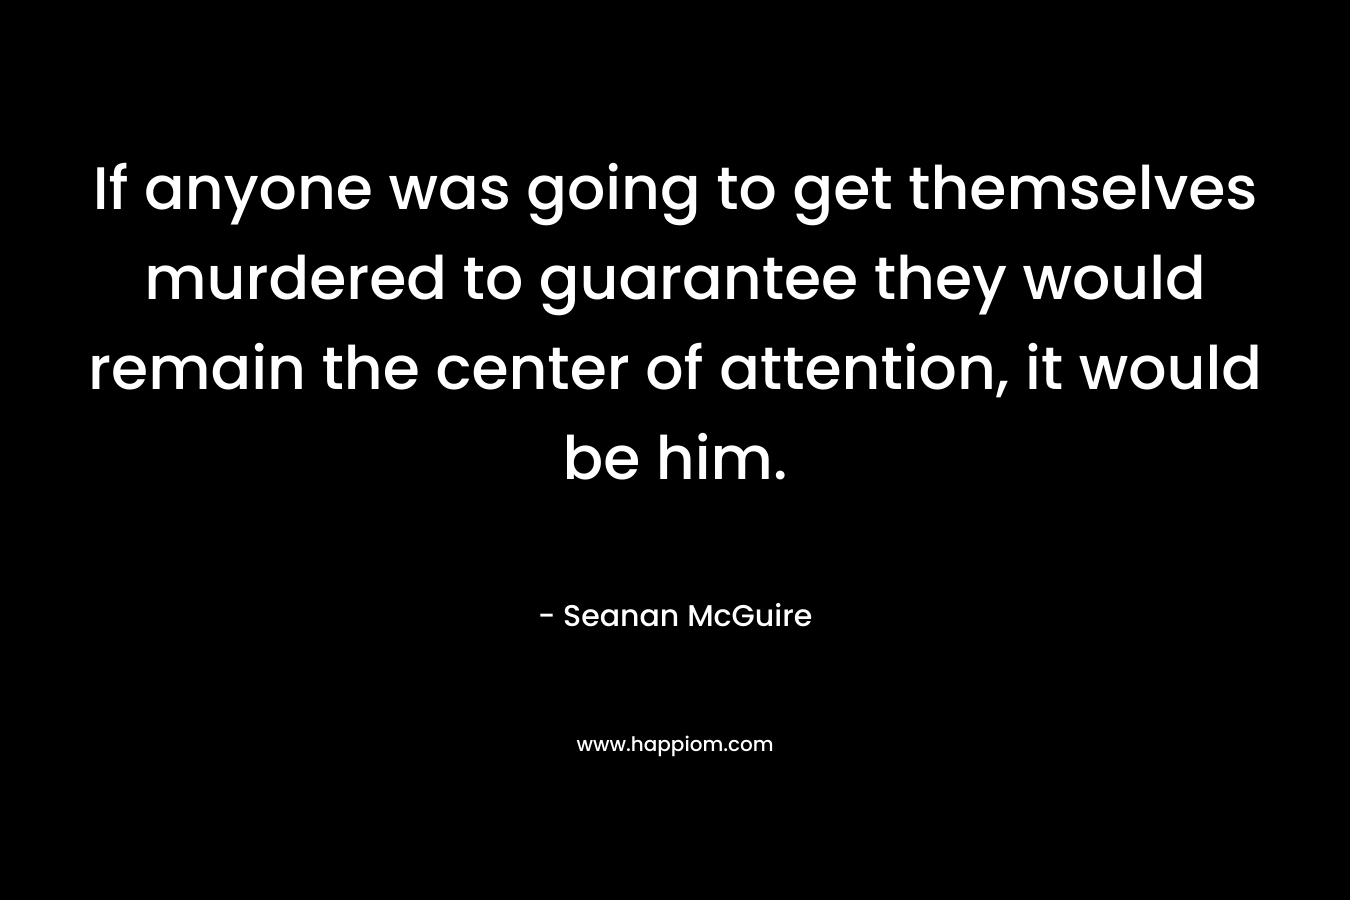 If anyone was going to get themselves murdered to guarantee they would remain the center of attention, it would be him. – Seanan McGuire